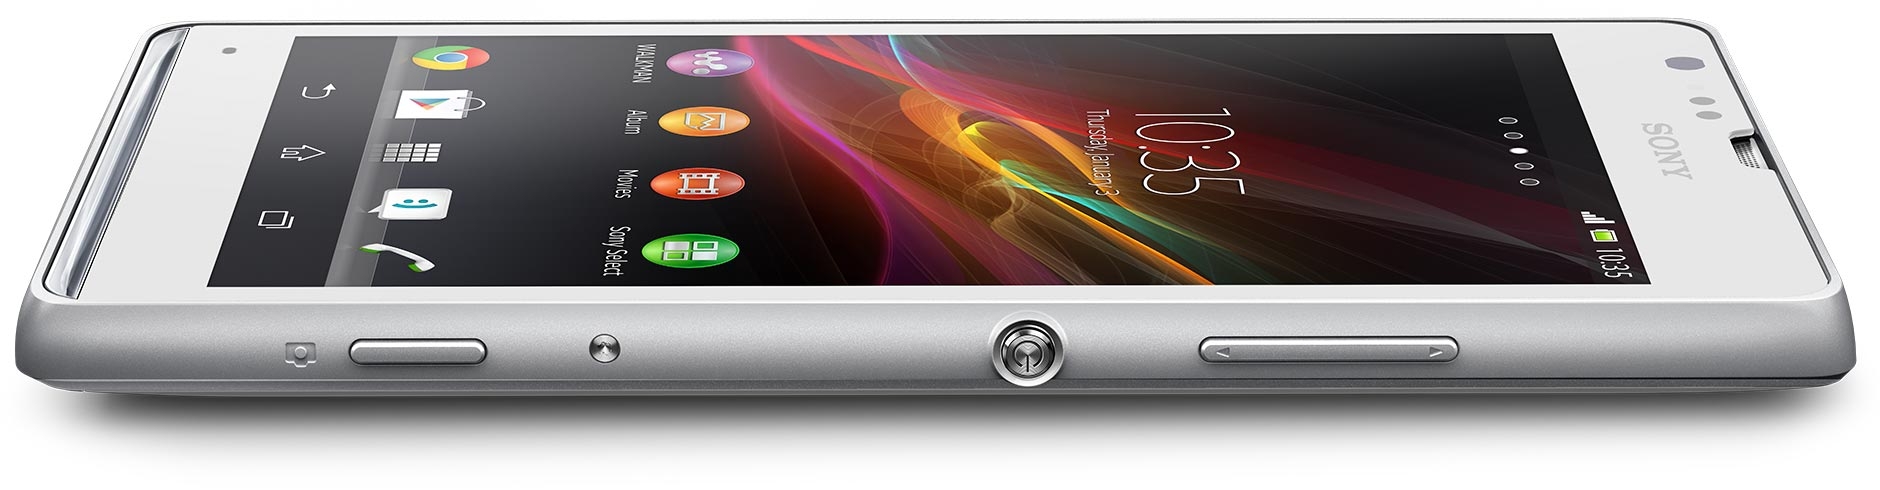 Discover the quality precision craftsmanship that the Xperia SP NFC Android smartphone offers.